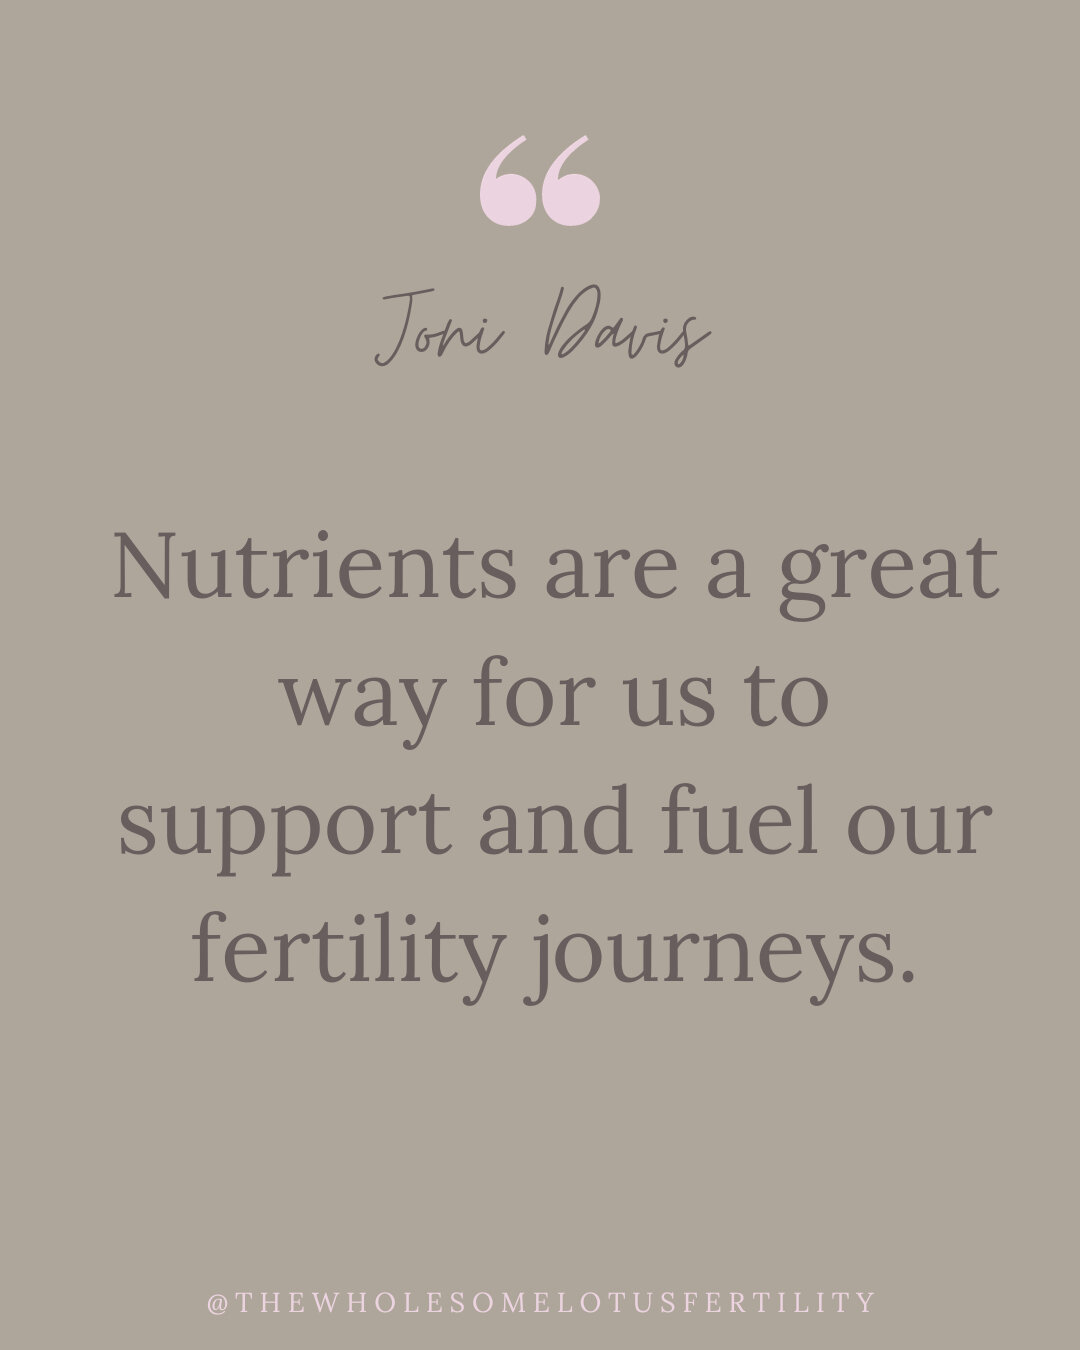 On tomorrow&rsquo;s episode of The Wholesome Fertility Podcast, I will be speaking with Joni Davis who is the founder of @beli.baby about what to look for in a quality prenatal vitamin. We will discuss ingredients and quality as well as why it is imp